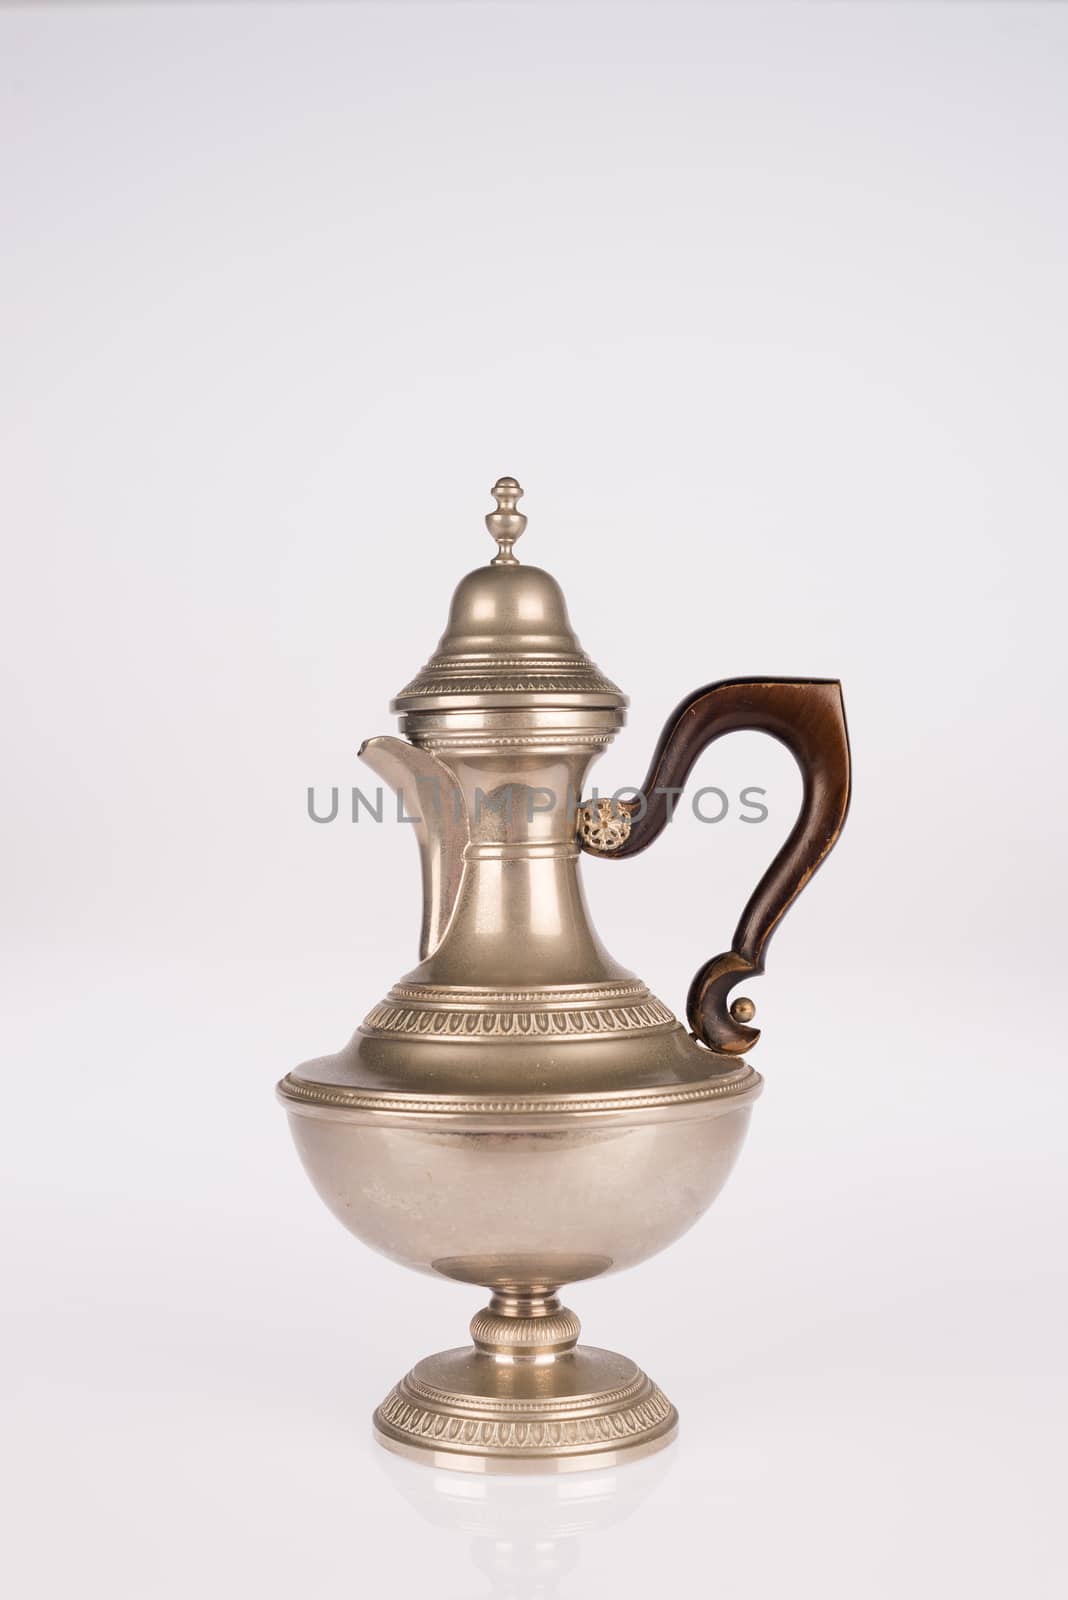 Old teapot with wooden handle isolated on white